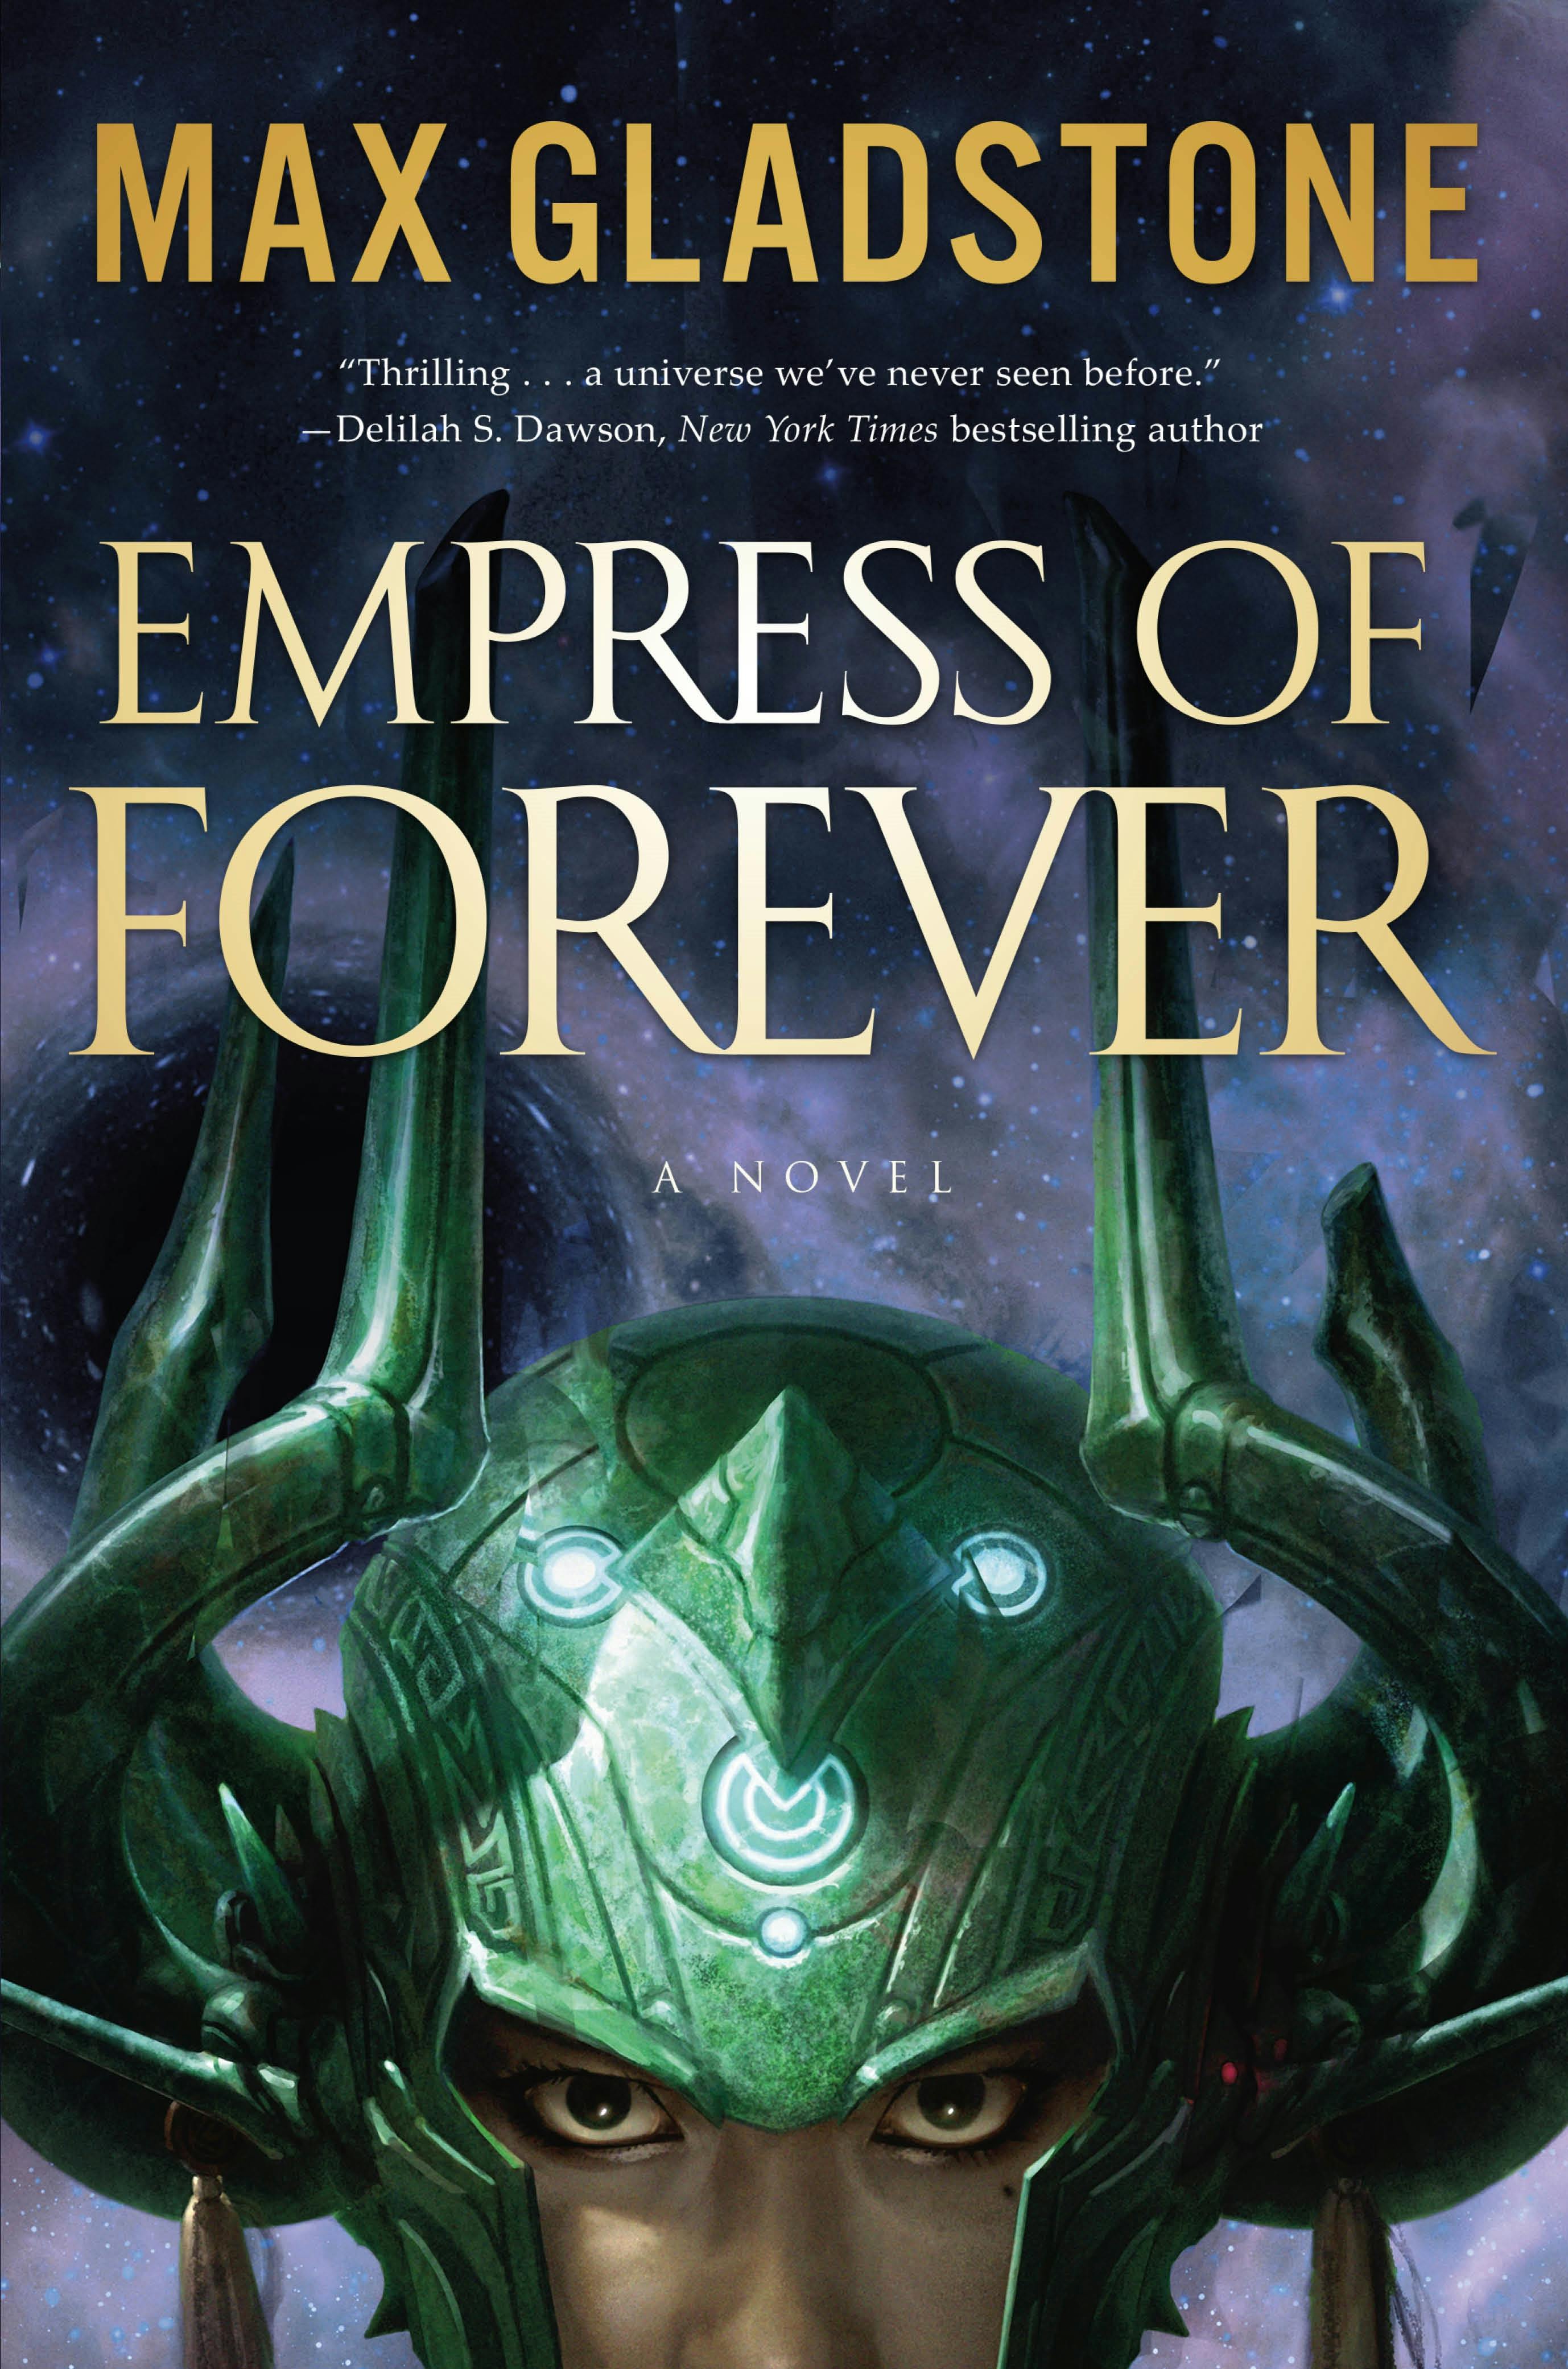 Cover for the book titled as: Empress of Forever